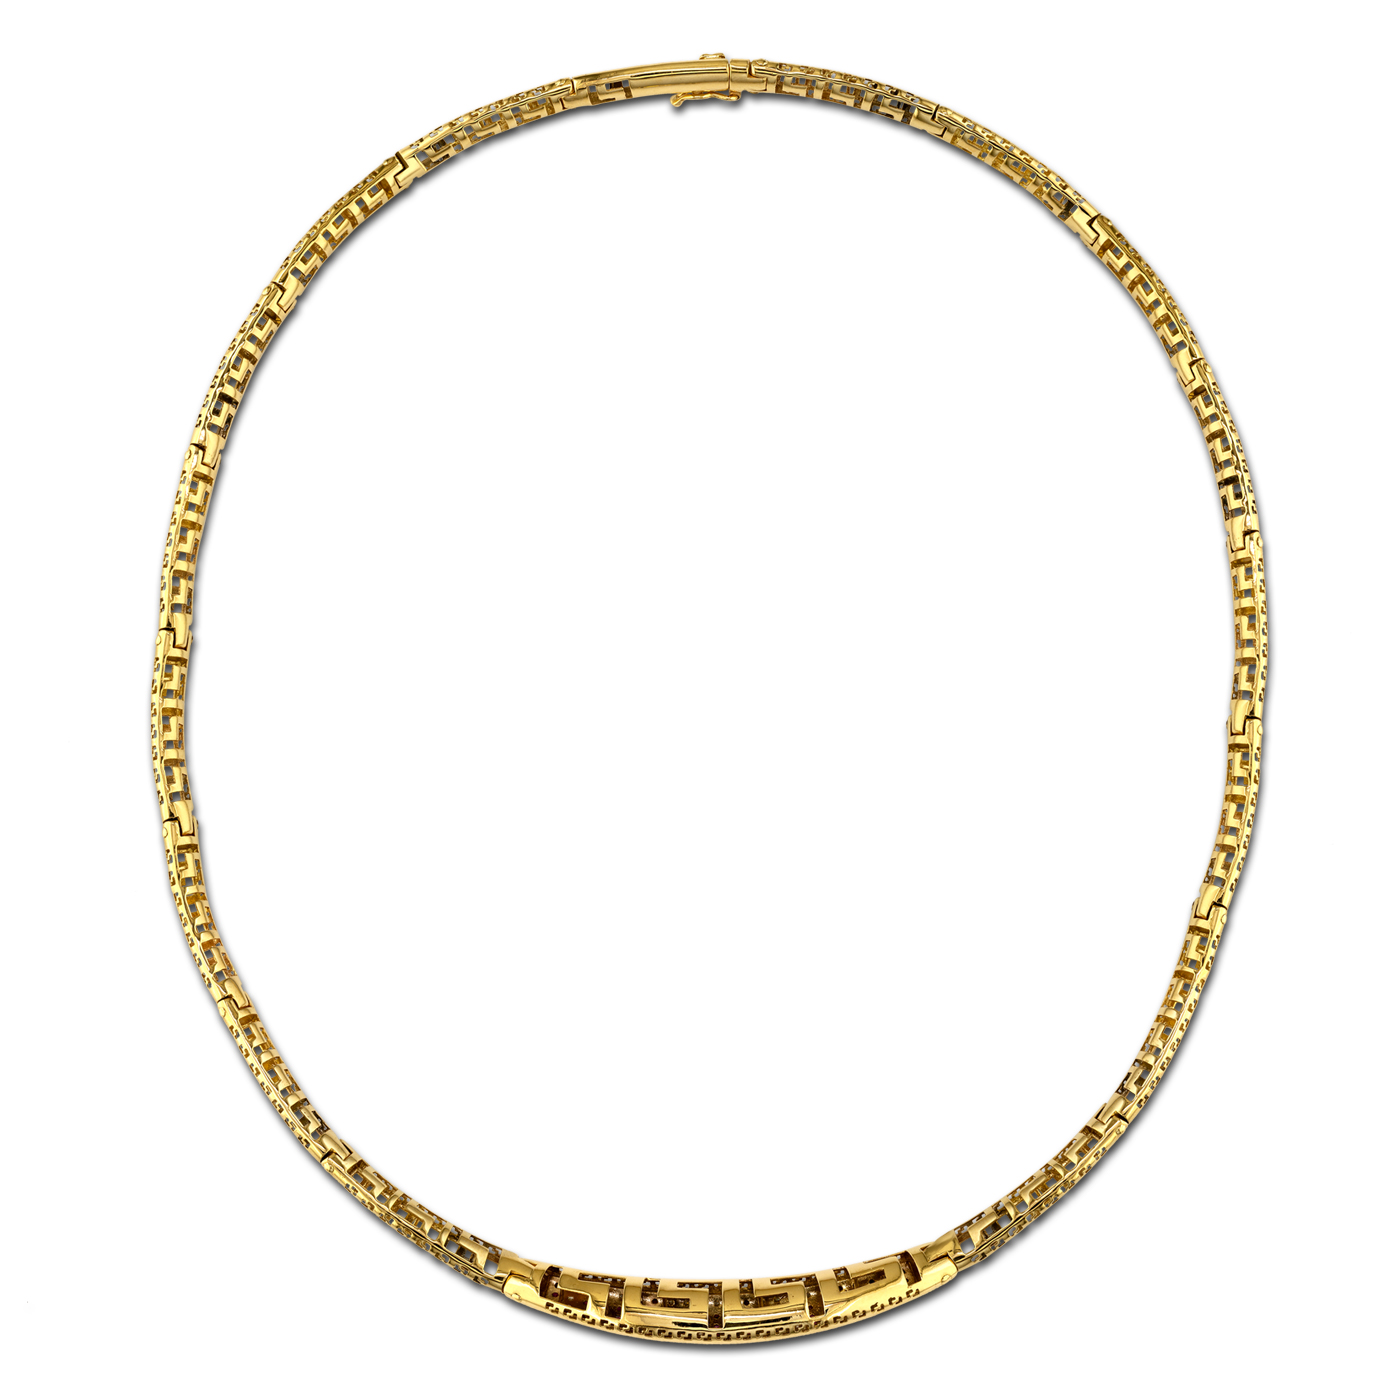 meander gold necklace with diamonds and rubies